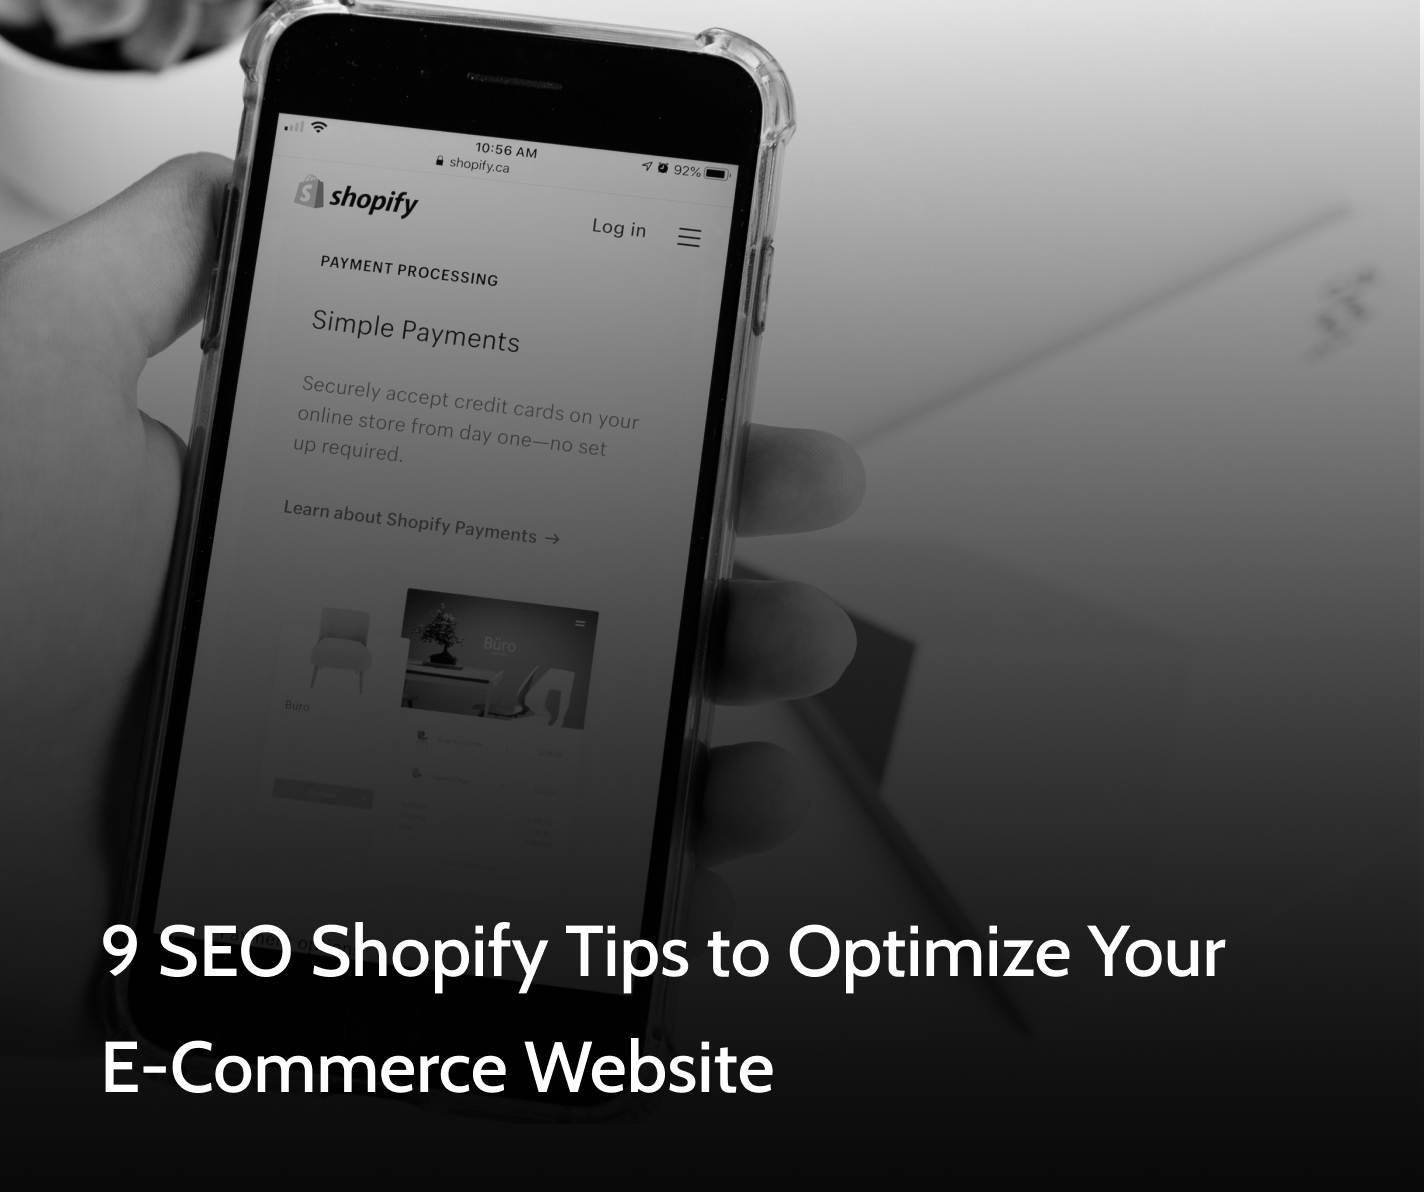 Site owner holding phone and reading through SEO Shopify tips